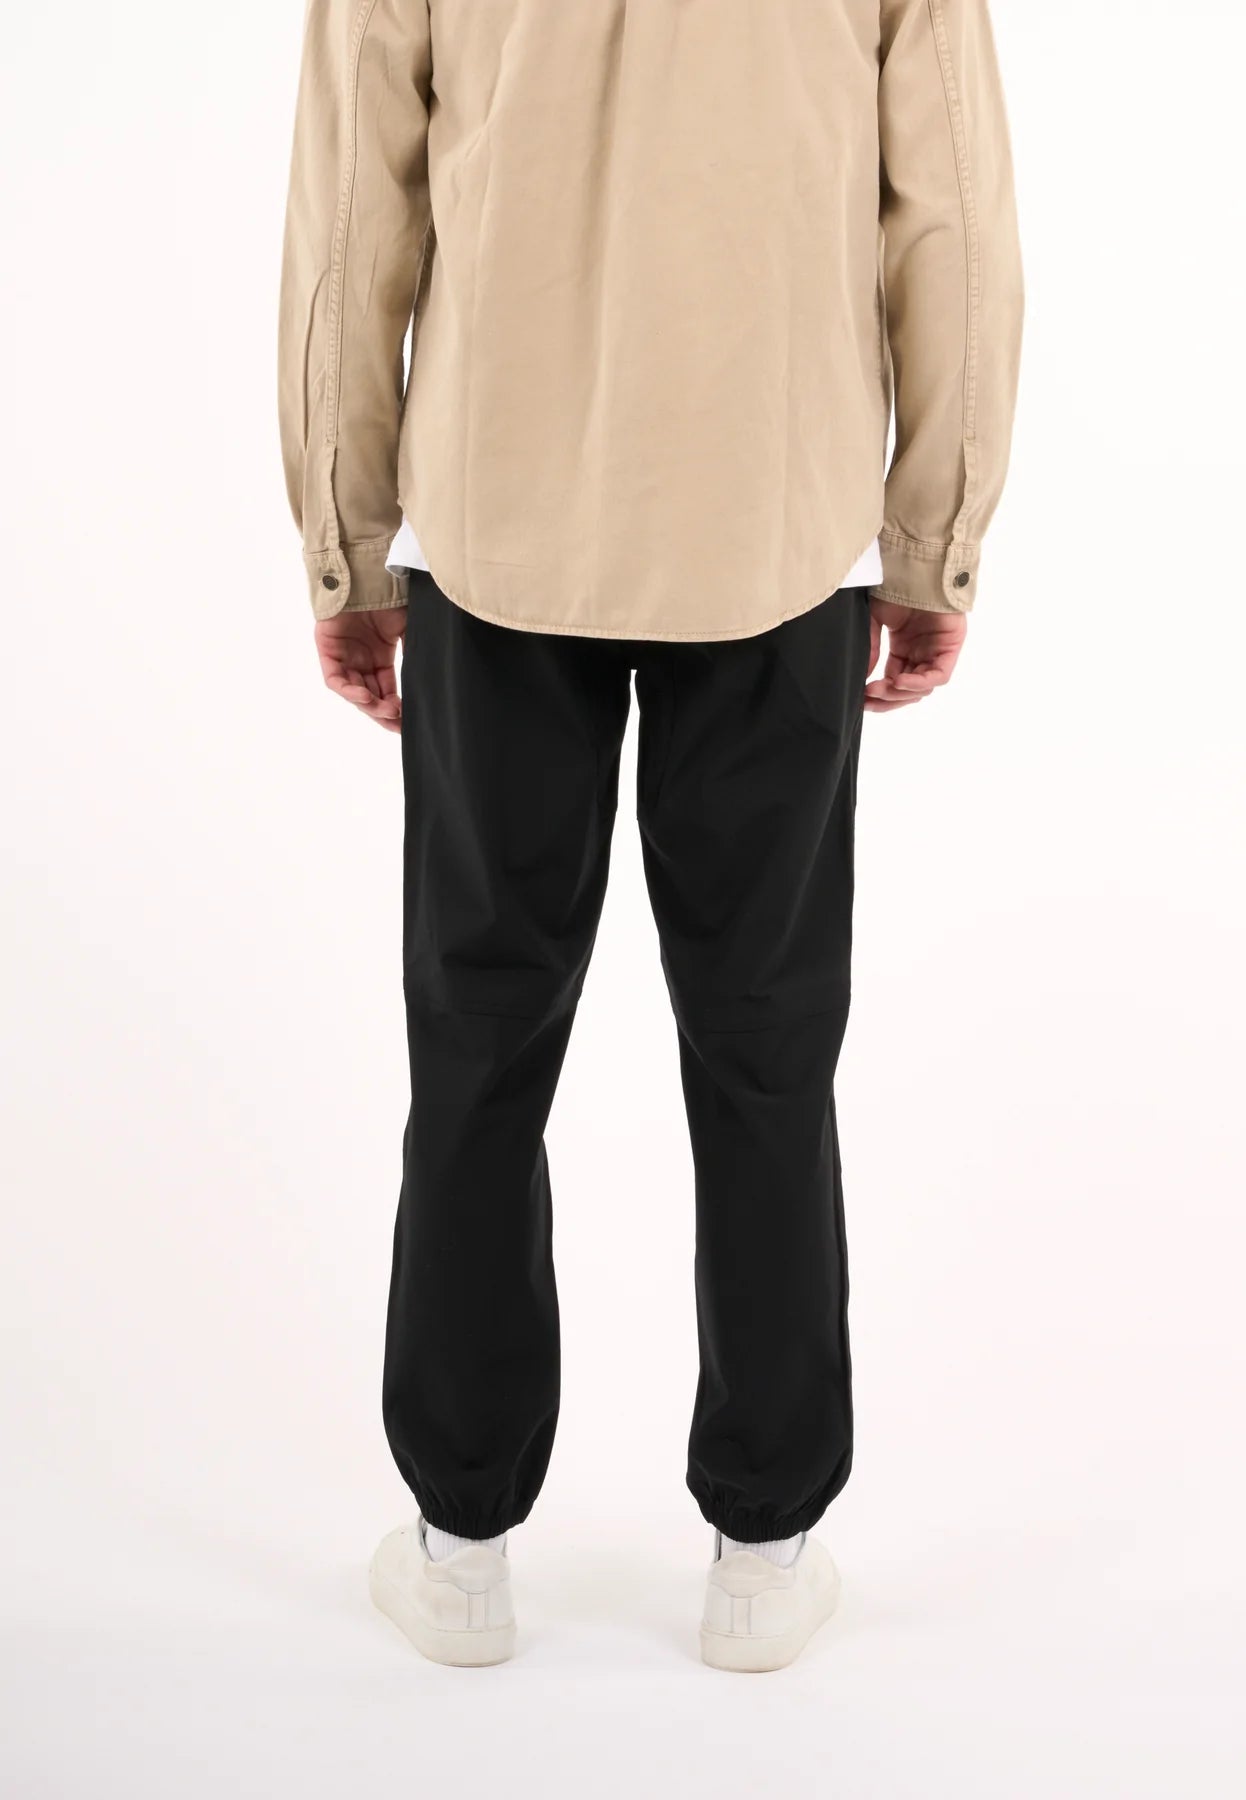 Stretch Knowledge Cotton Apparel Pant - Outdoor Trekking Pant